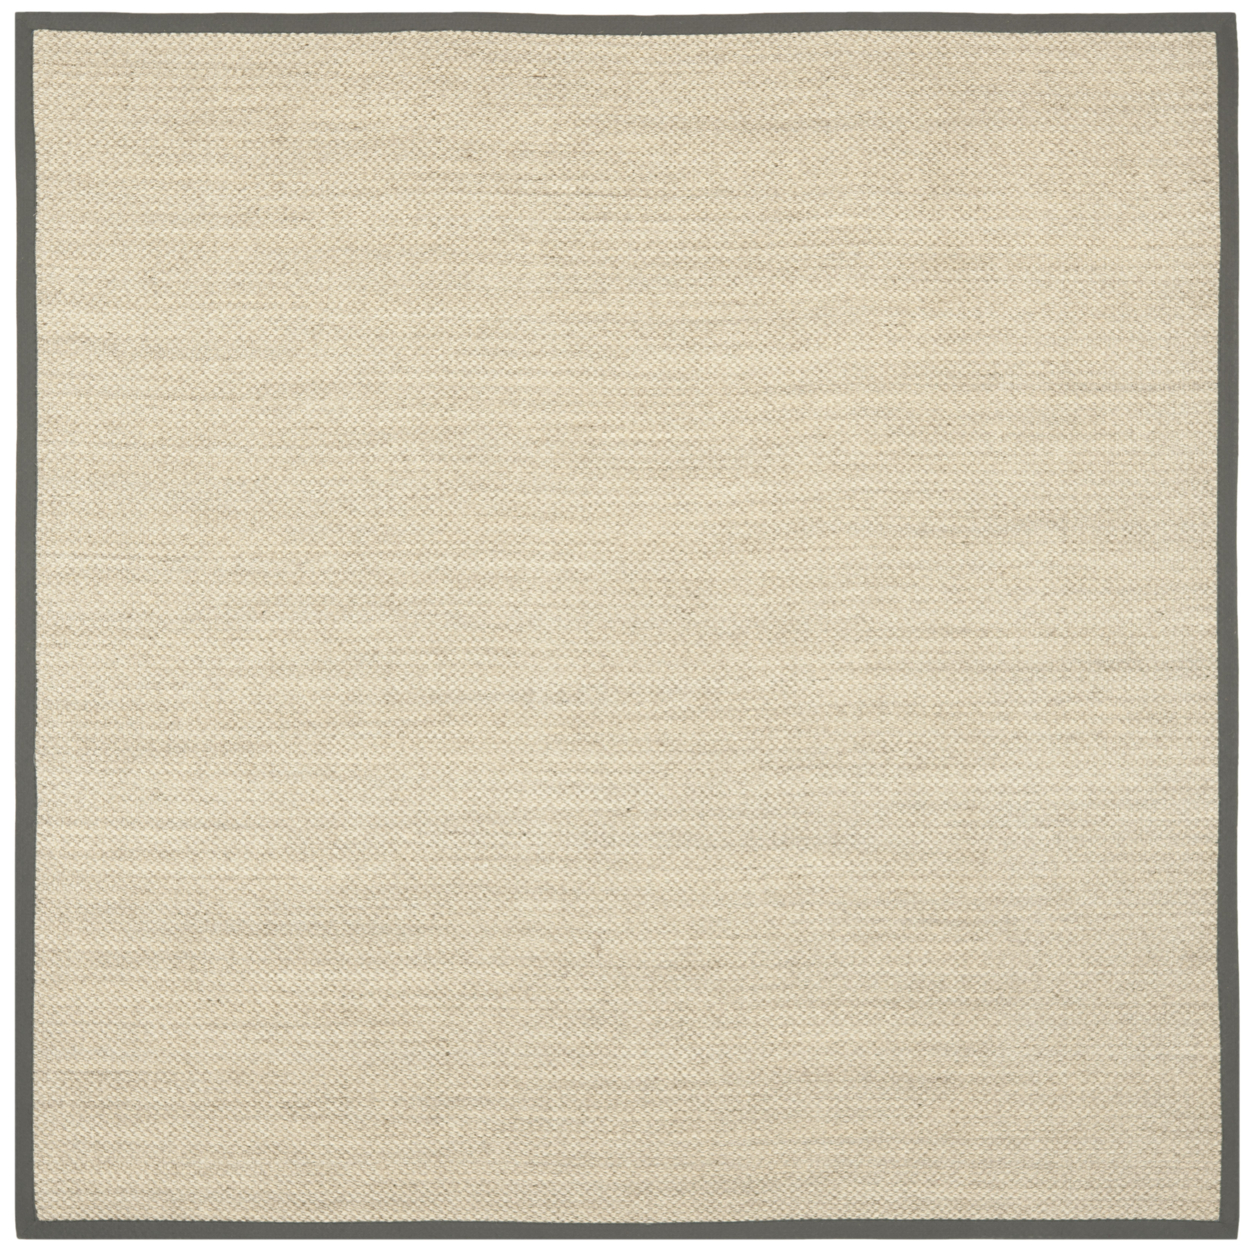 SAFAVIEH Natural Fiber Collection NF443B Marble/Grey Rug - 9' Square